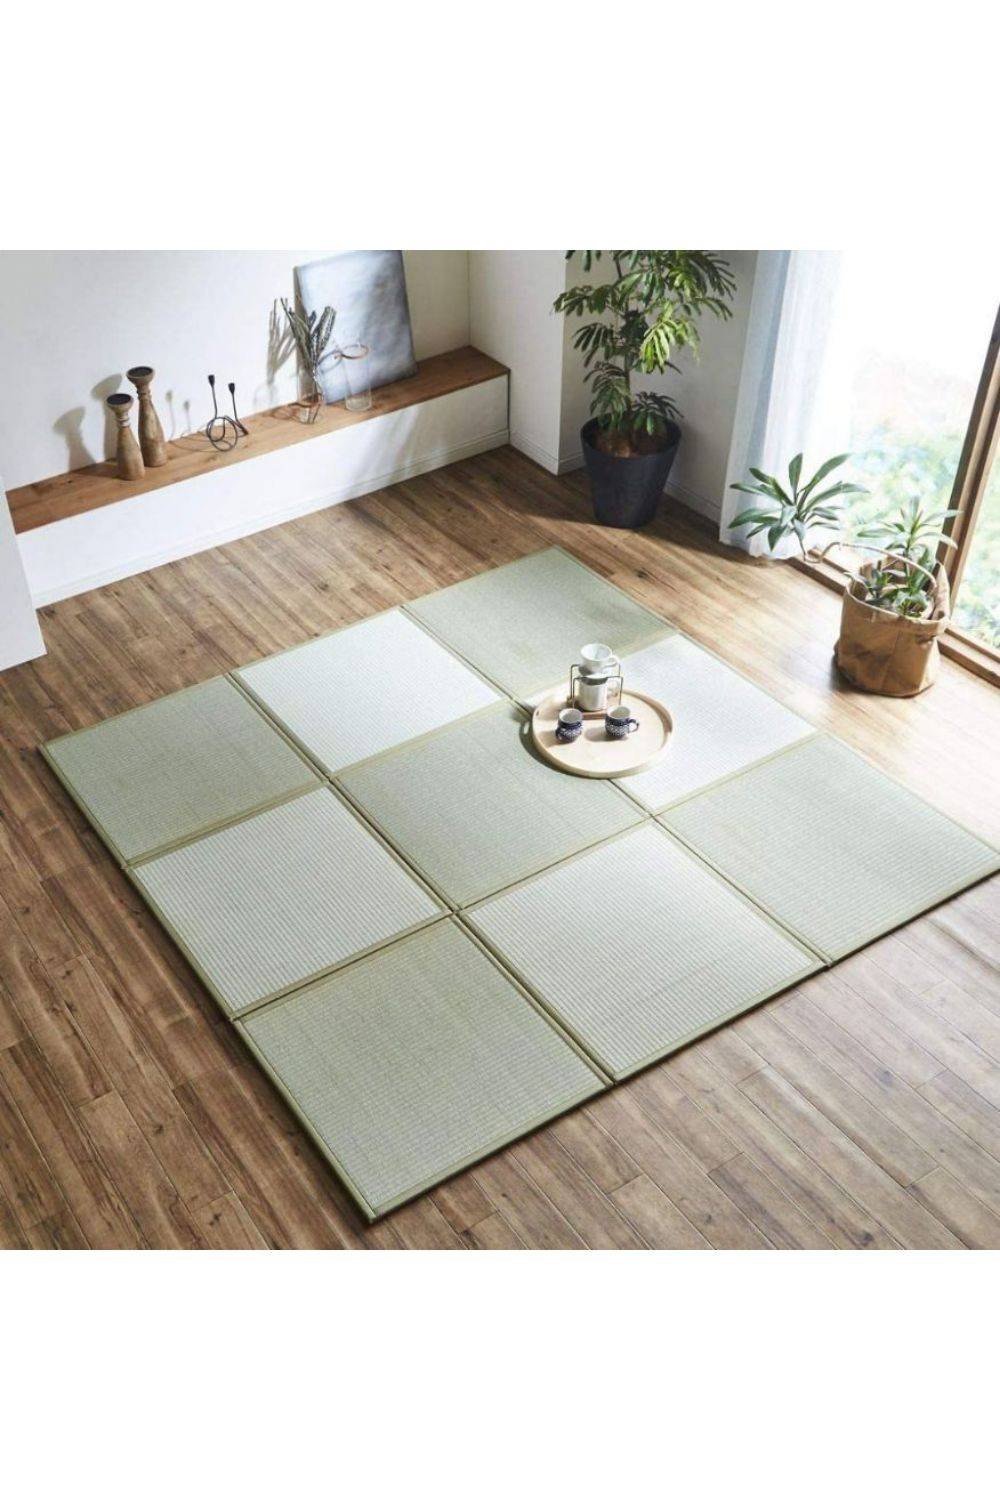 A Japanese-style room with tatami floor mats arranged in a 3x3 grid. The mats have a light green color with beige borders. In the center of the arrangement sits a small, round wooden tray with a clear glass teapot and two cups. 